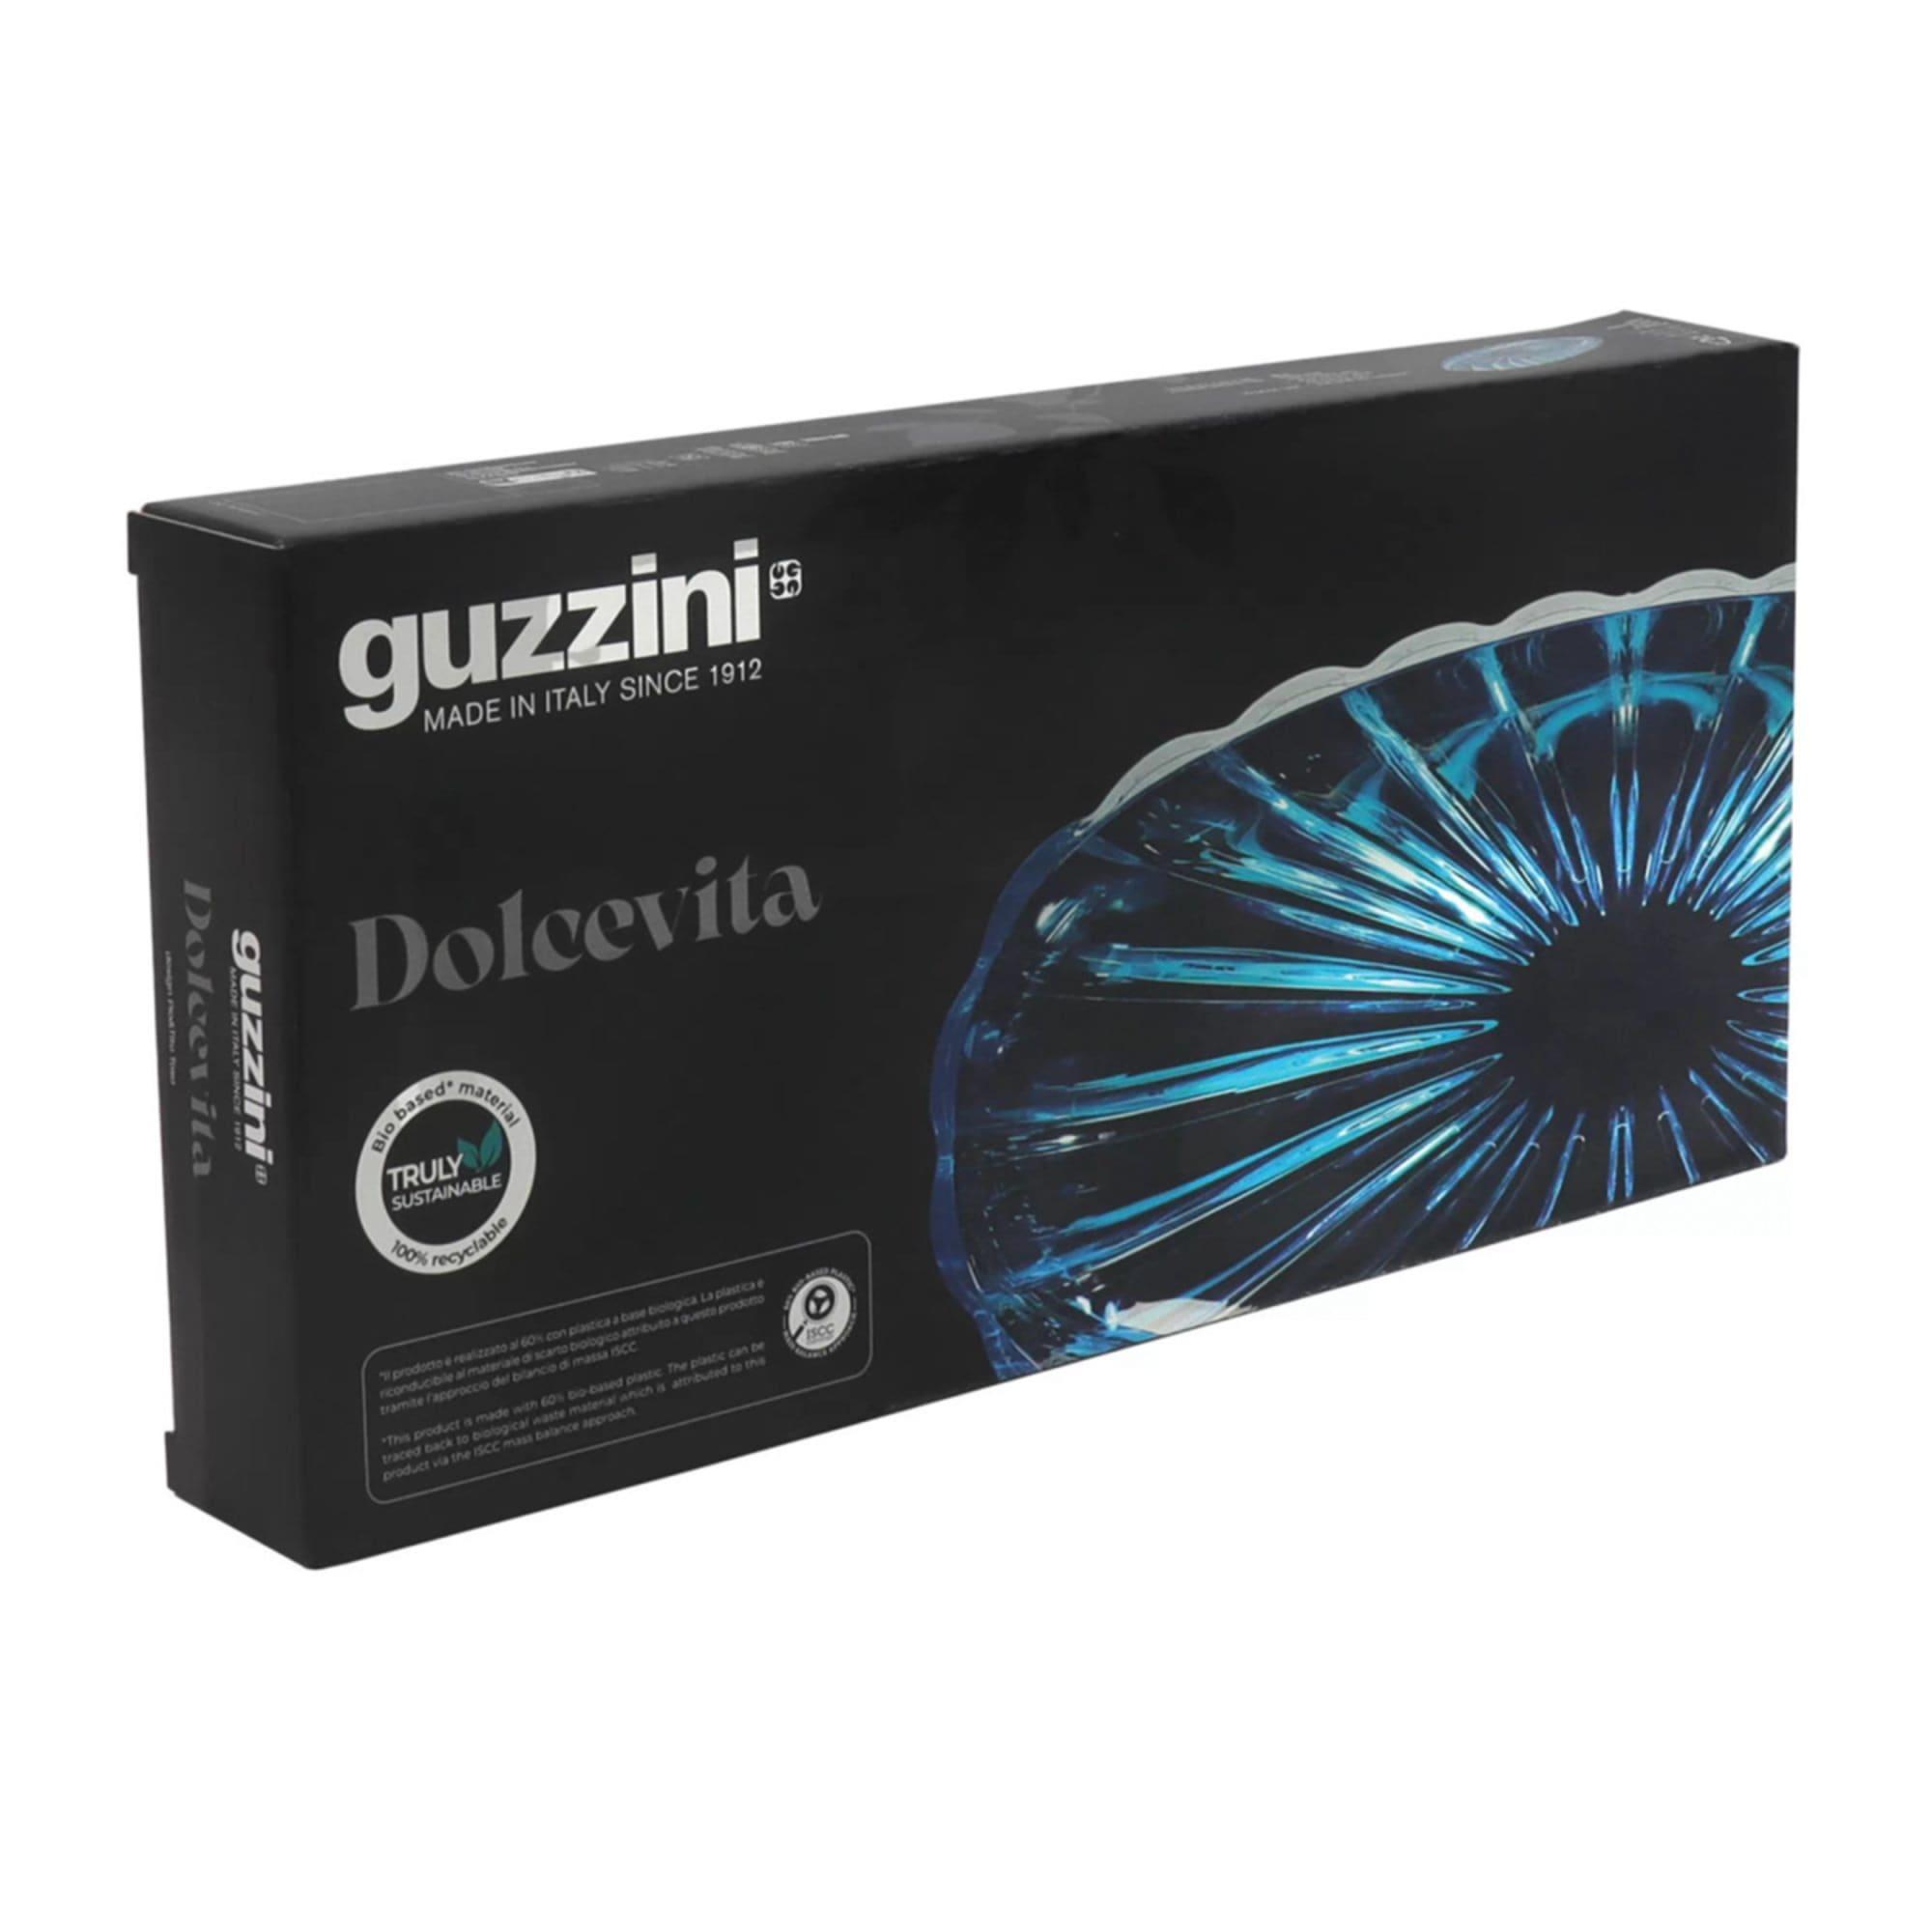 Guzzini Dolcevita Oval Serving Tray 38x19cm Mother of Pearl Image 3